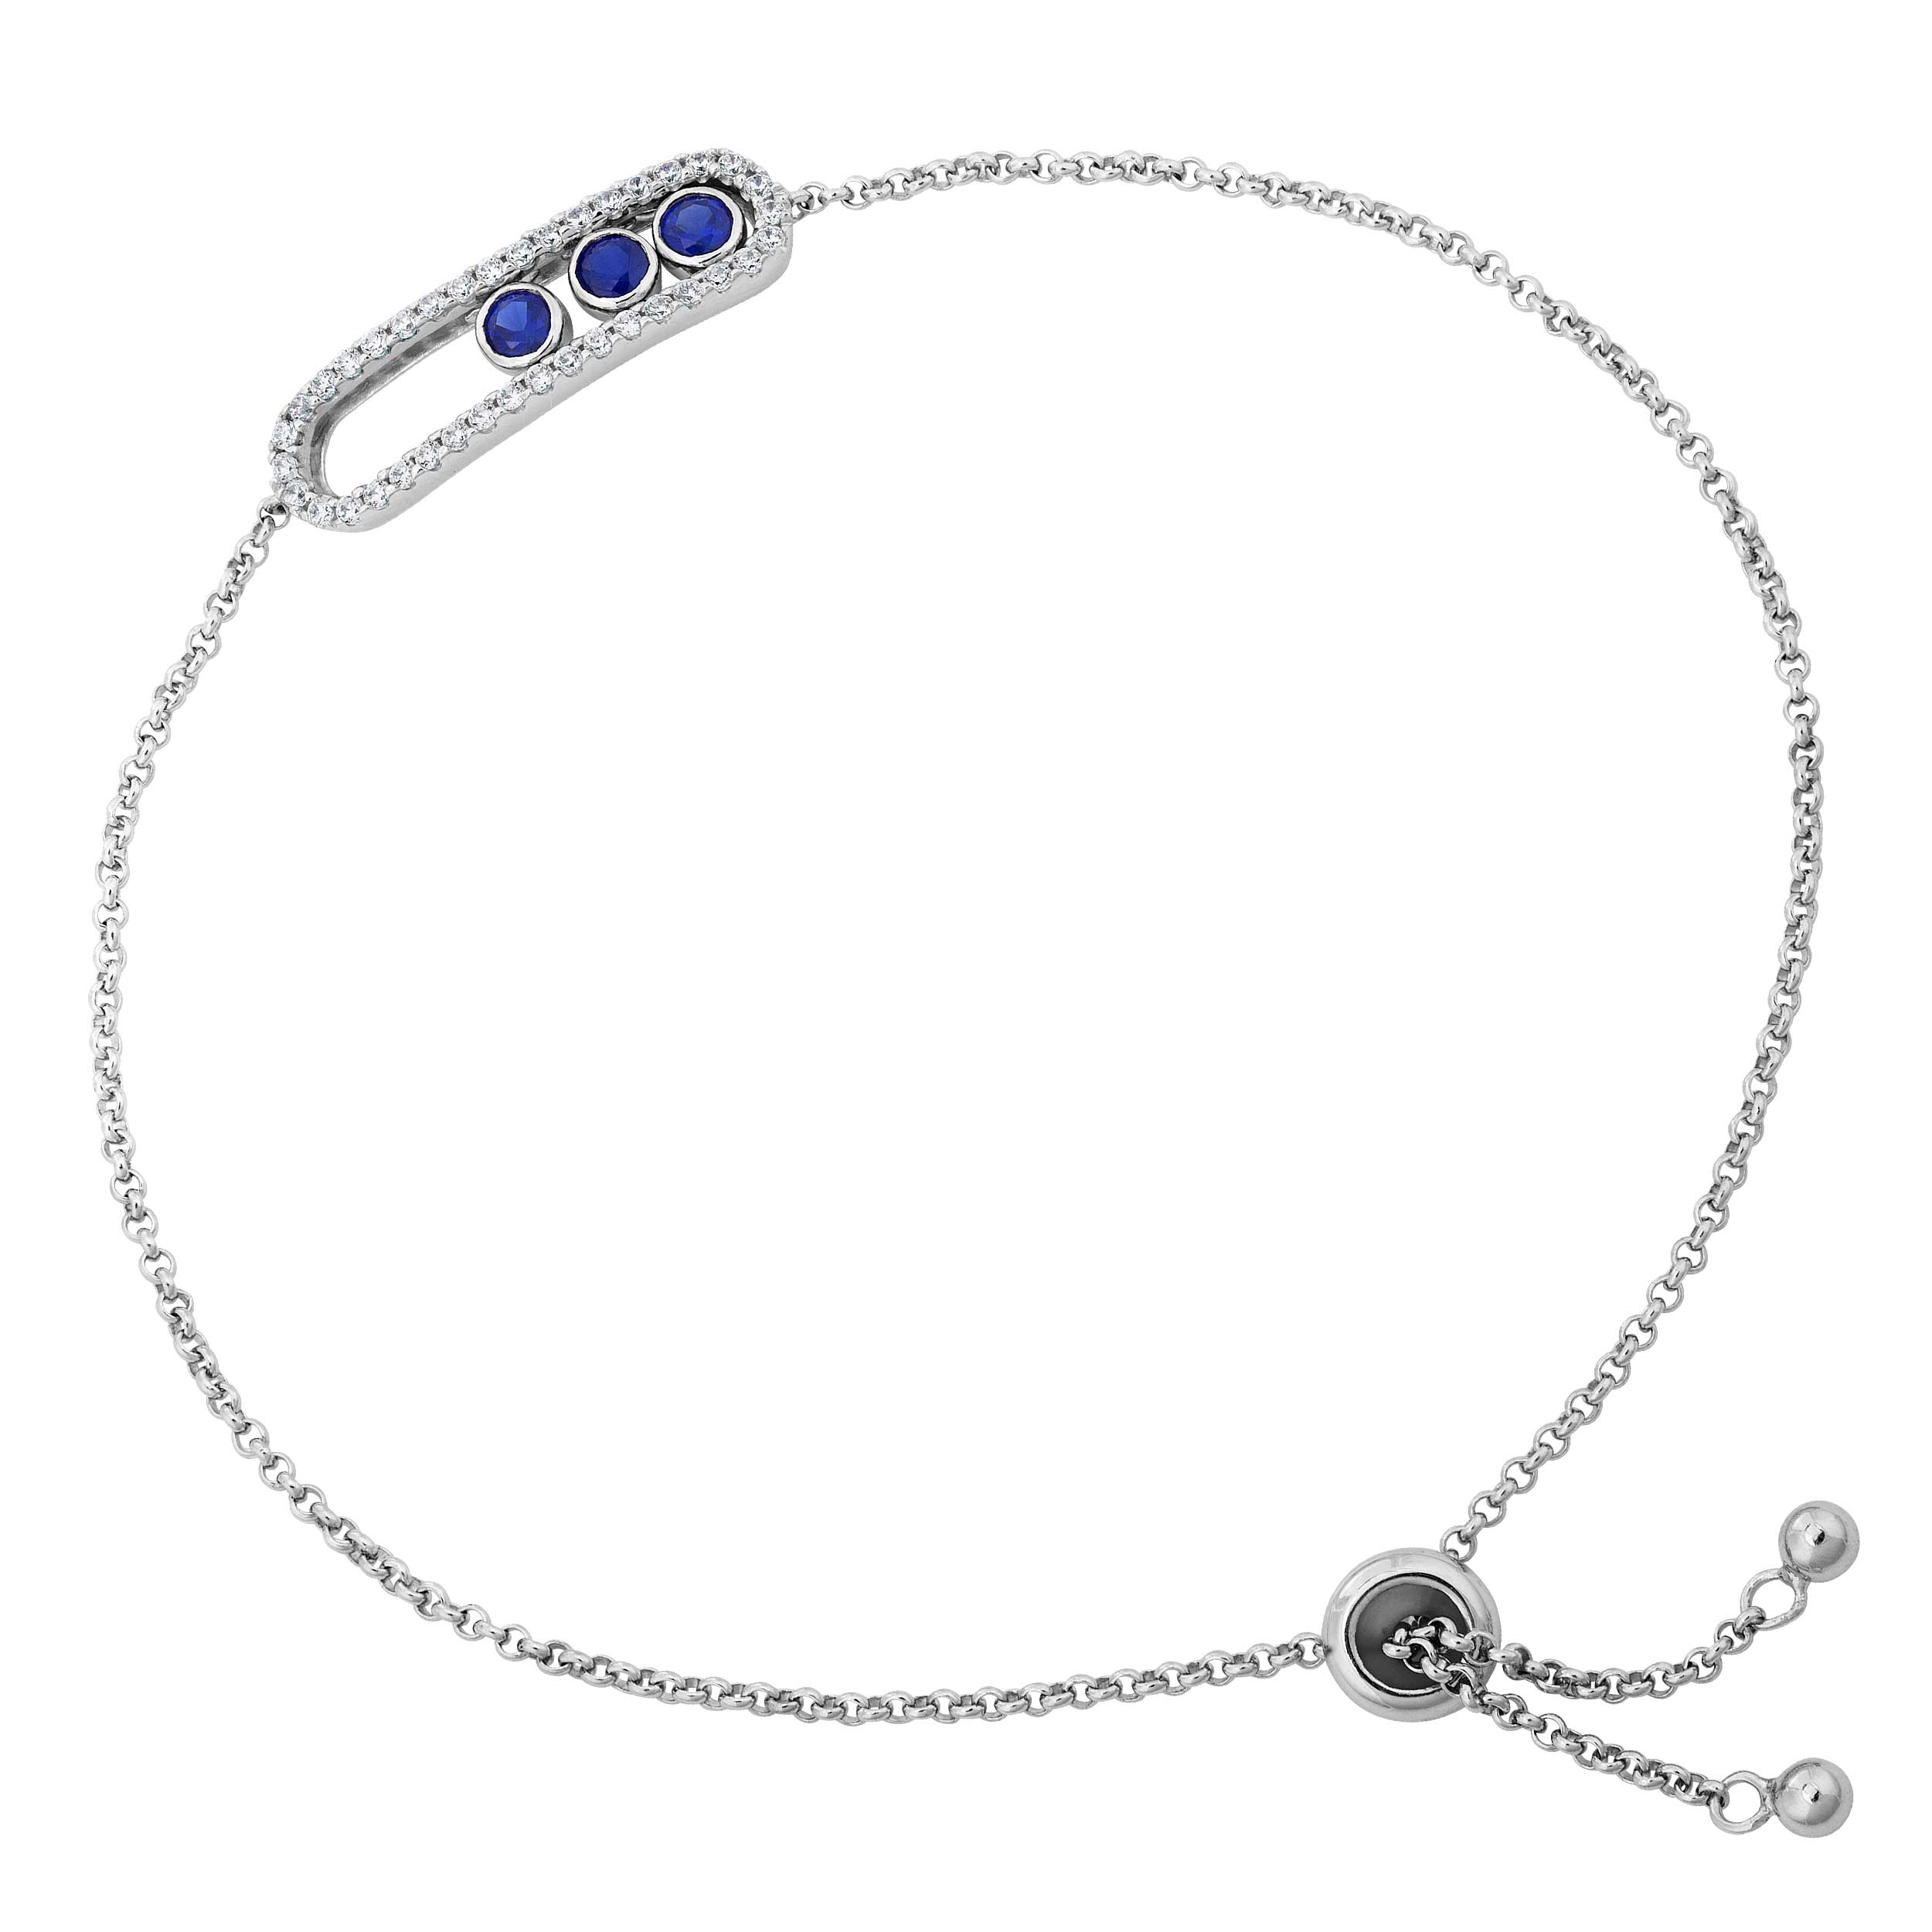 3-Sliding Stone Created Blue Sapphire and White Topaz Bracelets, Rhodium Plated Sterling Silver